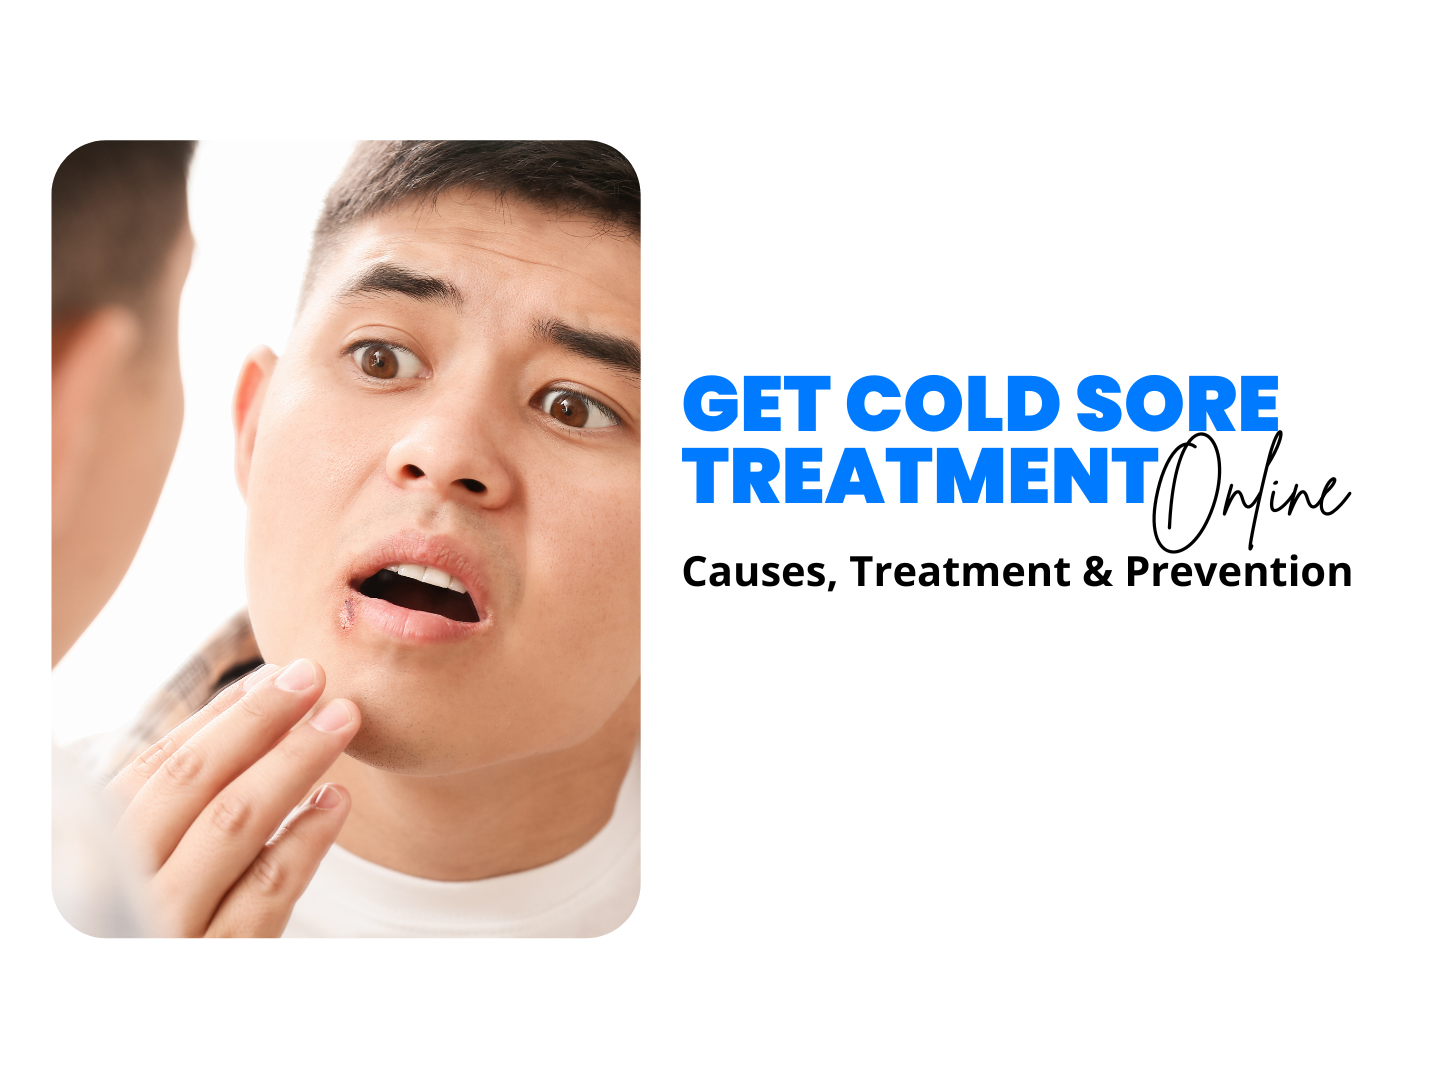 GET COLD SO
TREATMENT, nc

Causes, Treatment &amp; Prevention